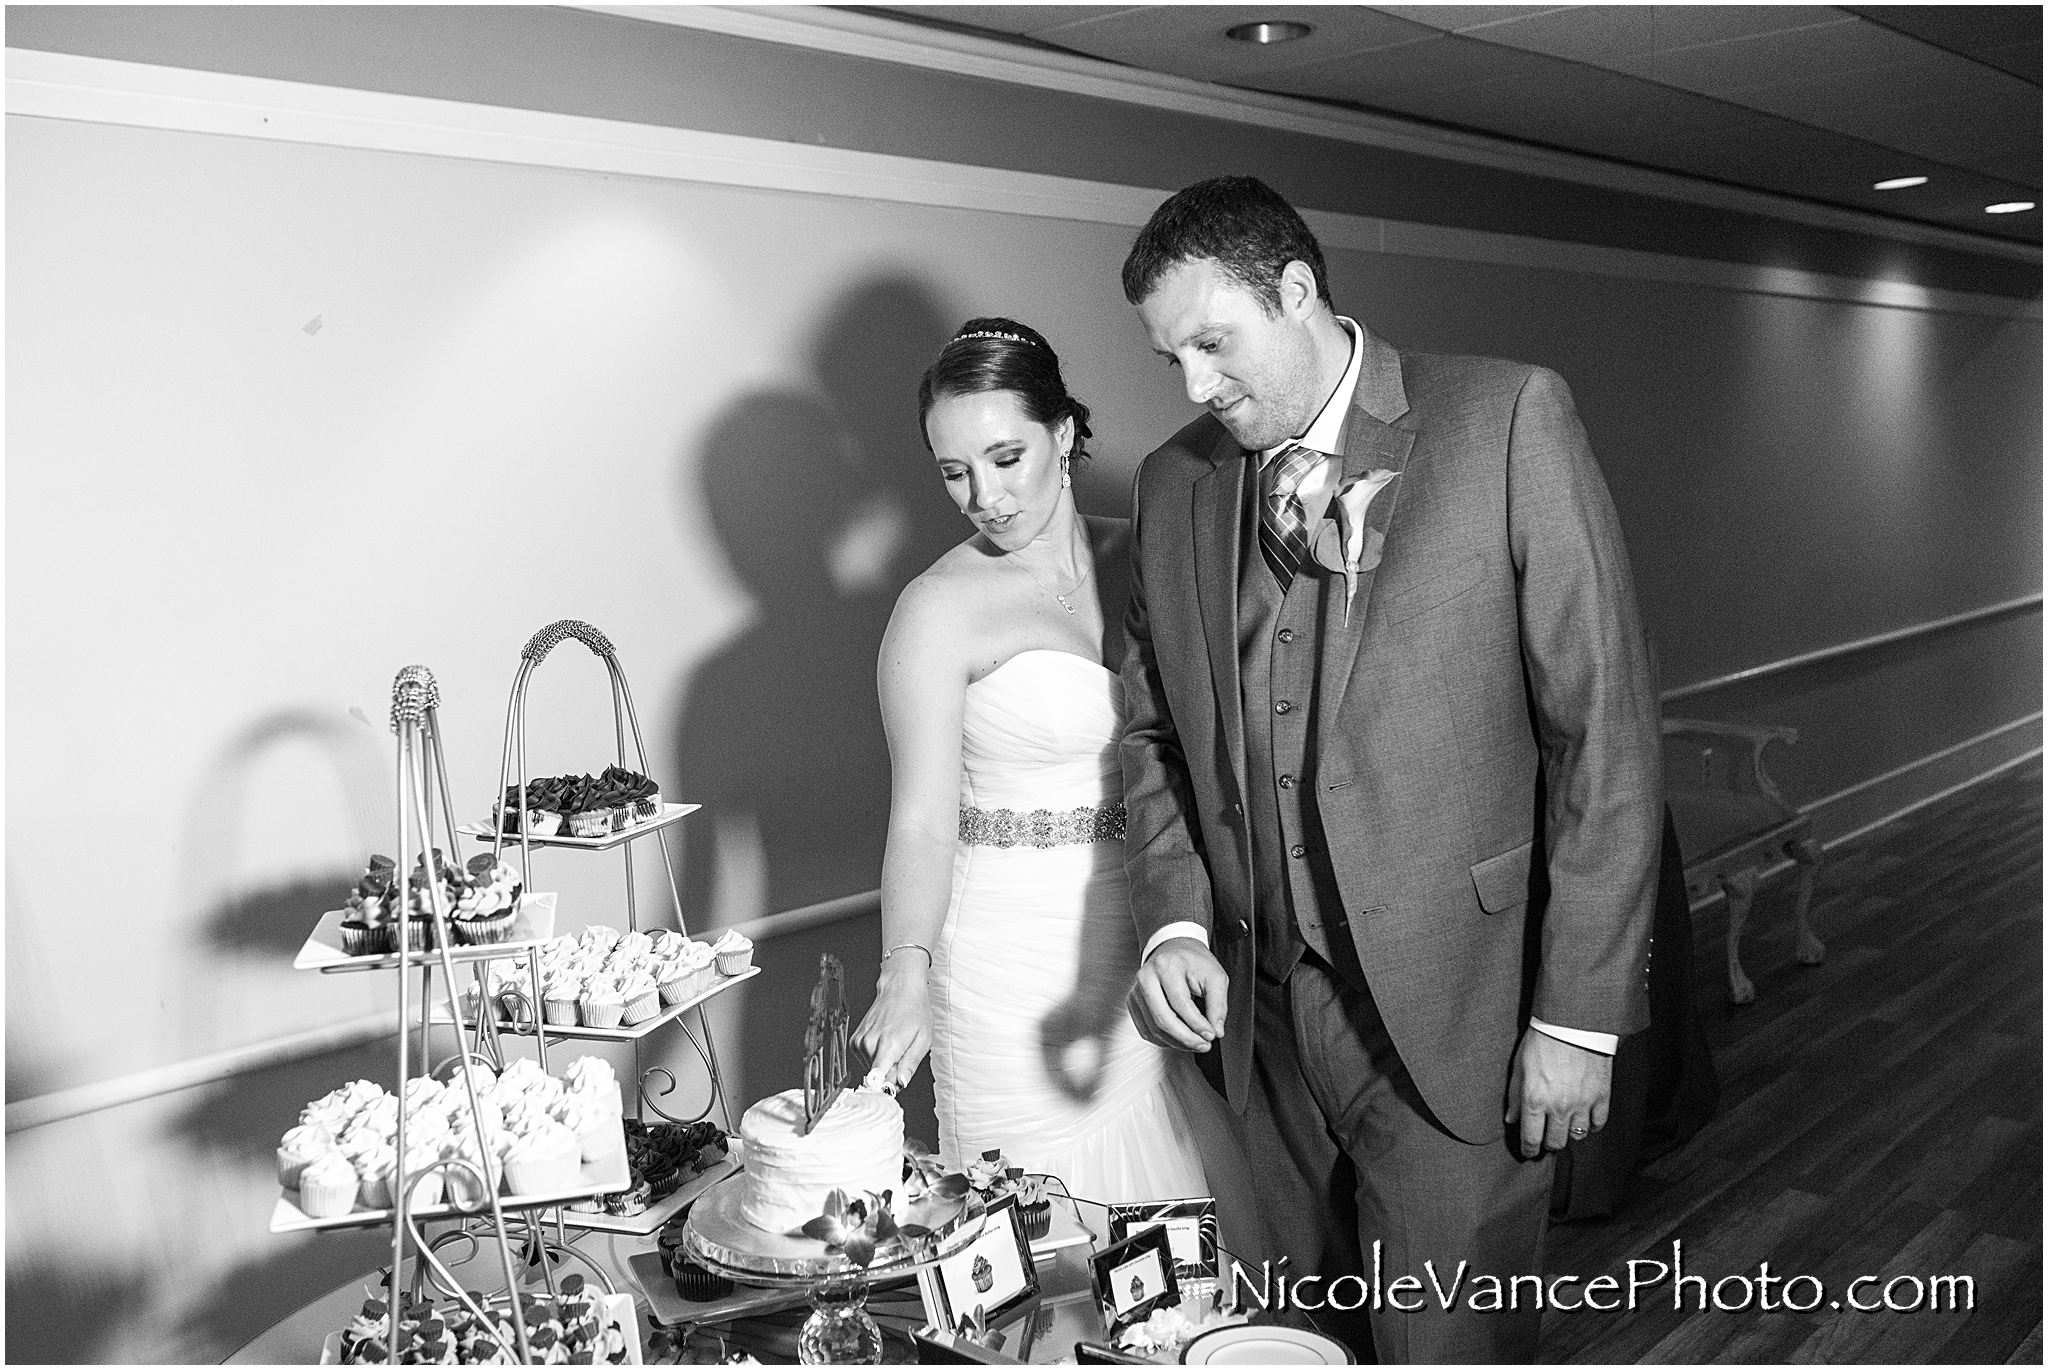 The bride and groom cut their cake, provided by Kakealicious at the reception at The Brownstone.